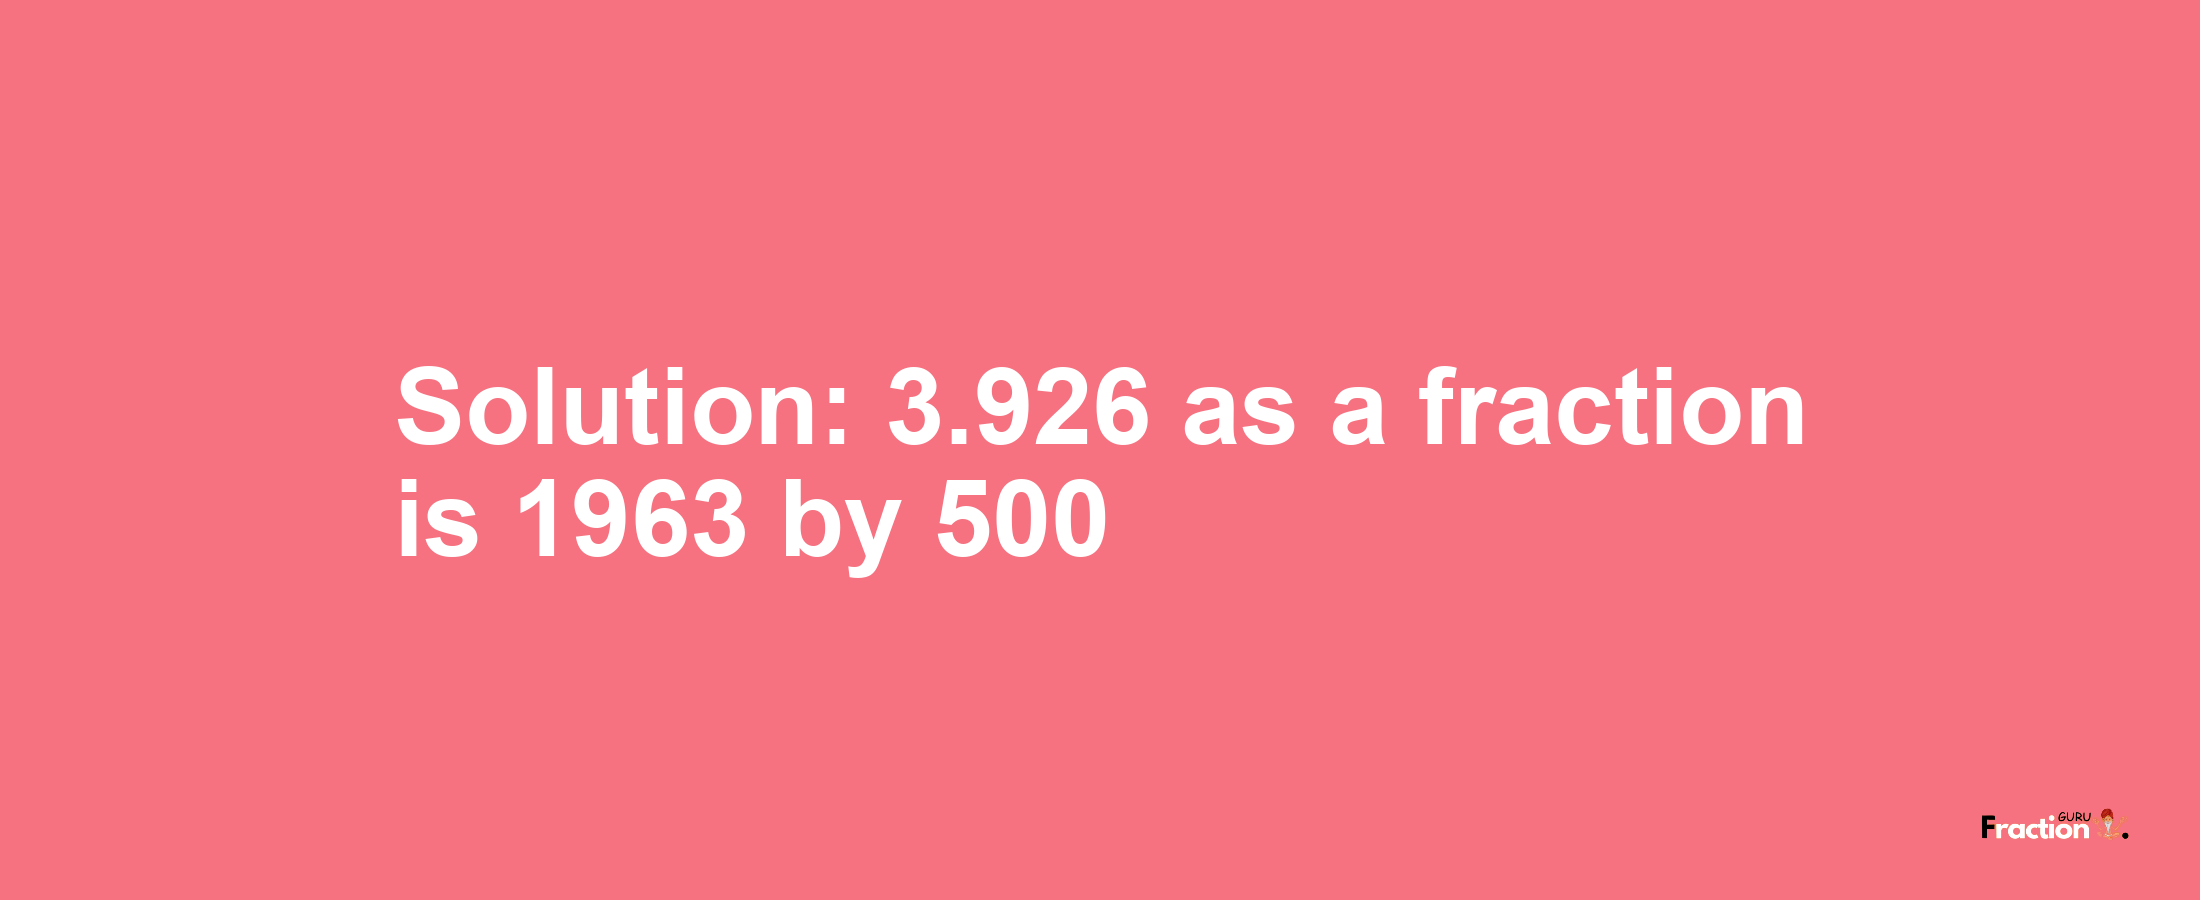 Solution:3.926 as a fraction is 1963/500